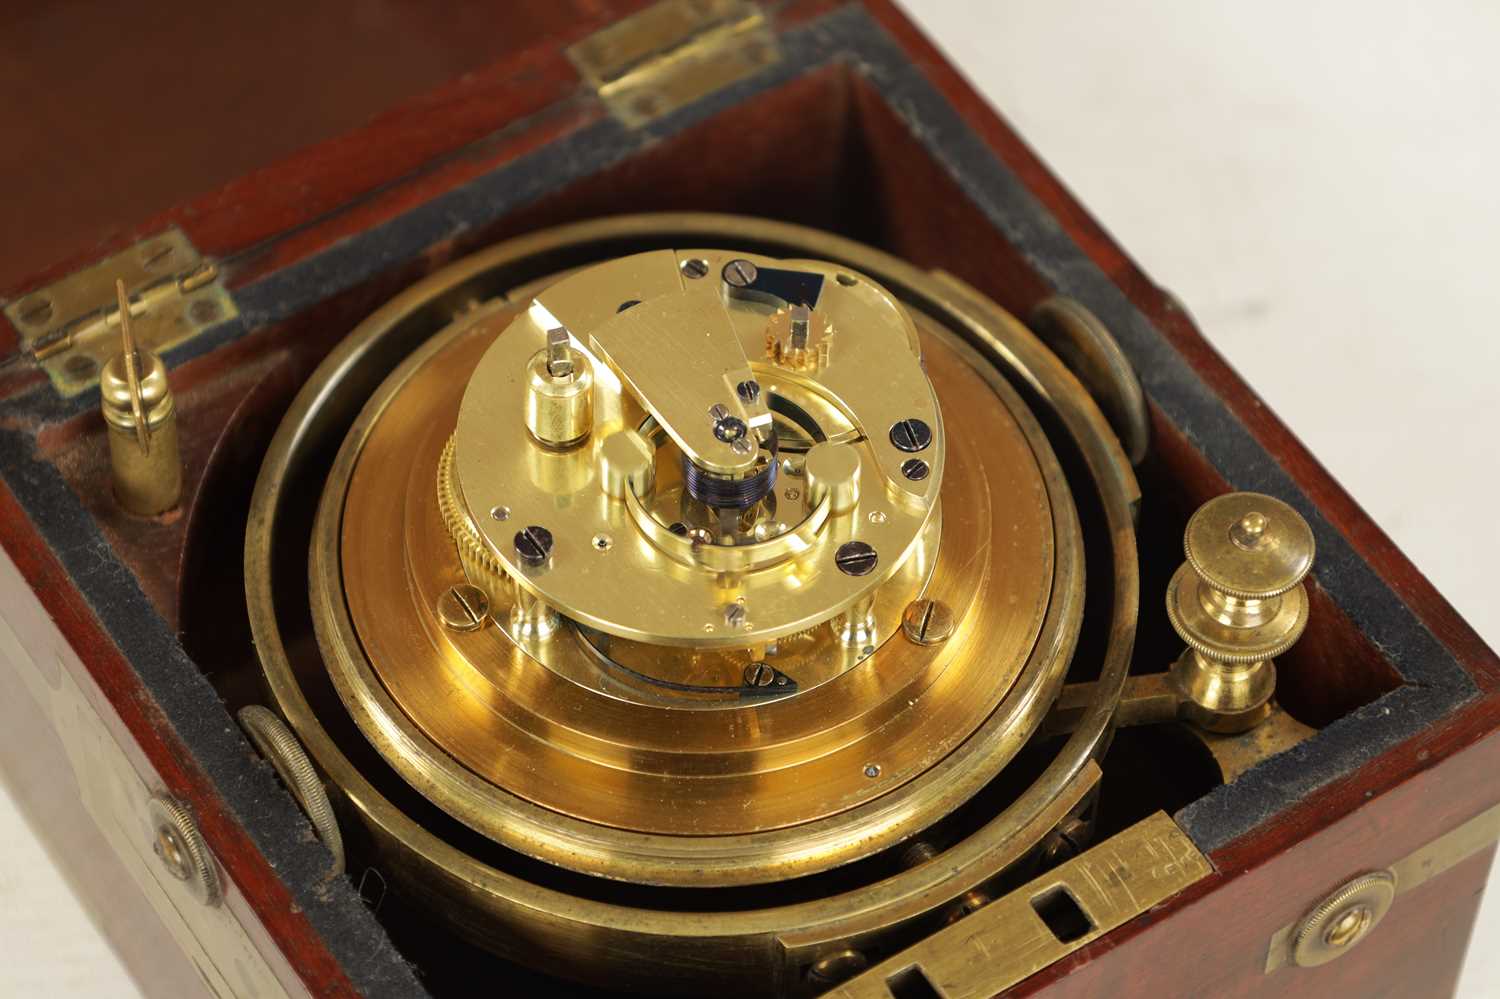 LITHERLAND, DAVIES & CO., LIVERPOOL. A SMALL MID 19TH CENTURY TWO-DAY MARINE CHRONOMETER - Image 7 of 8